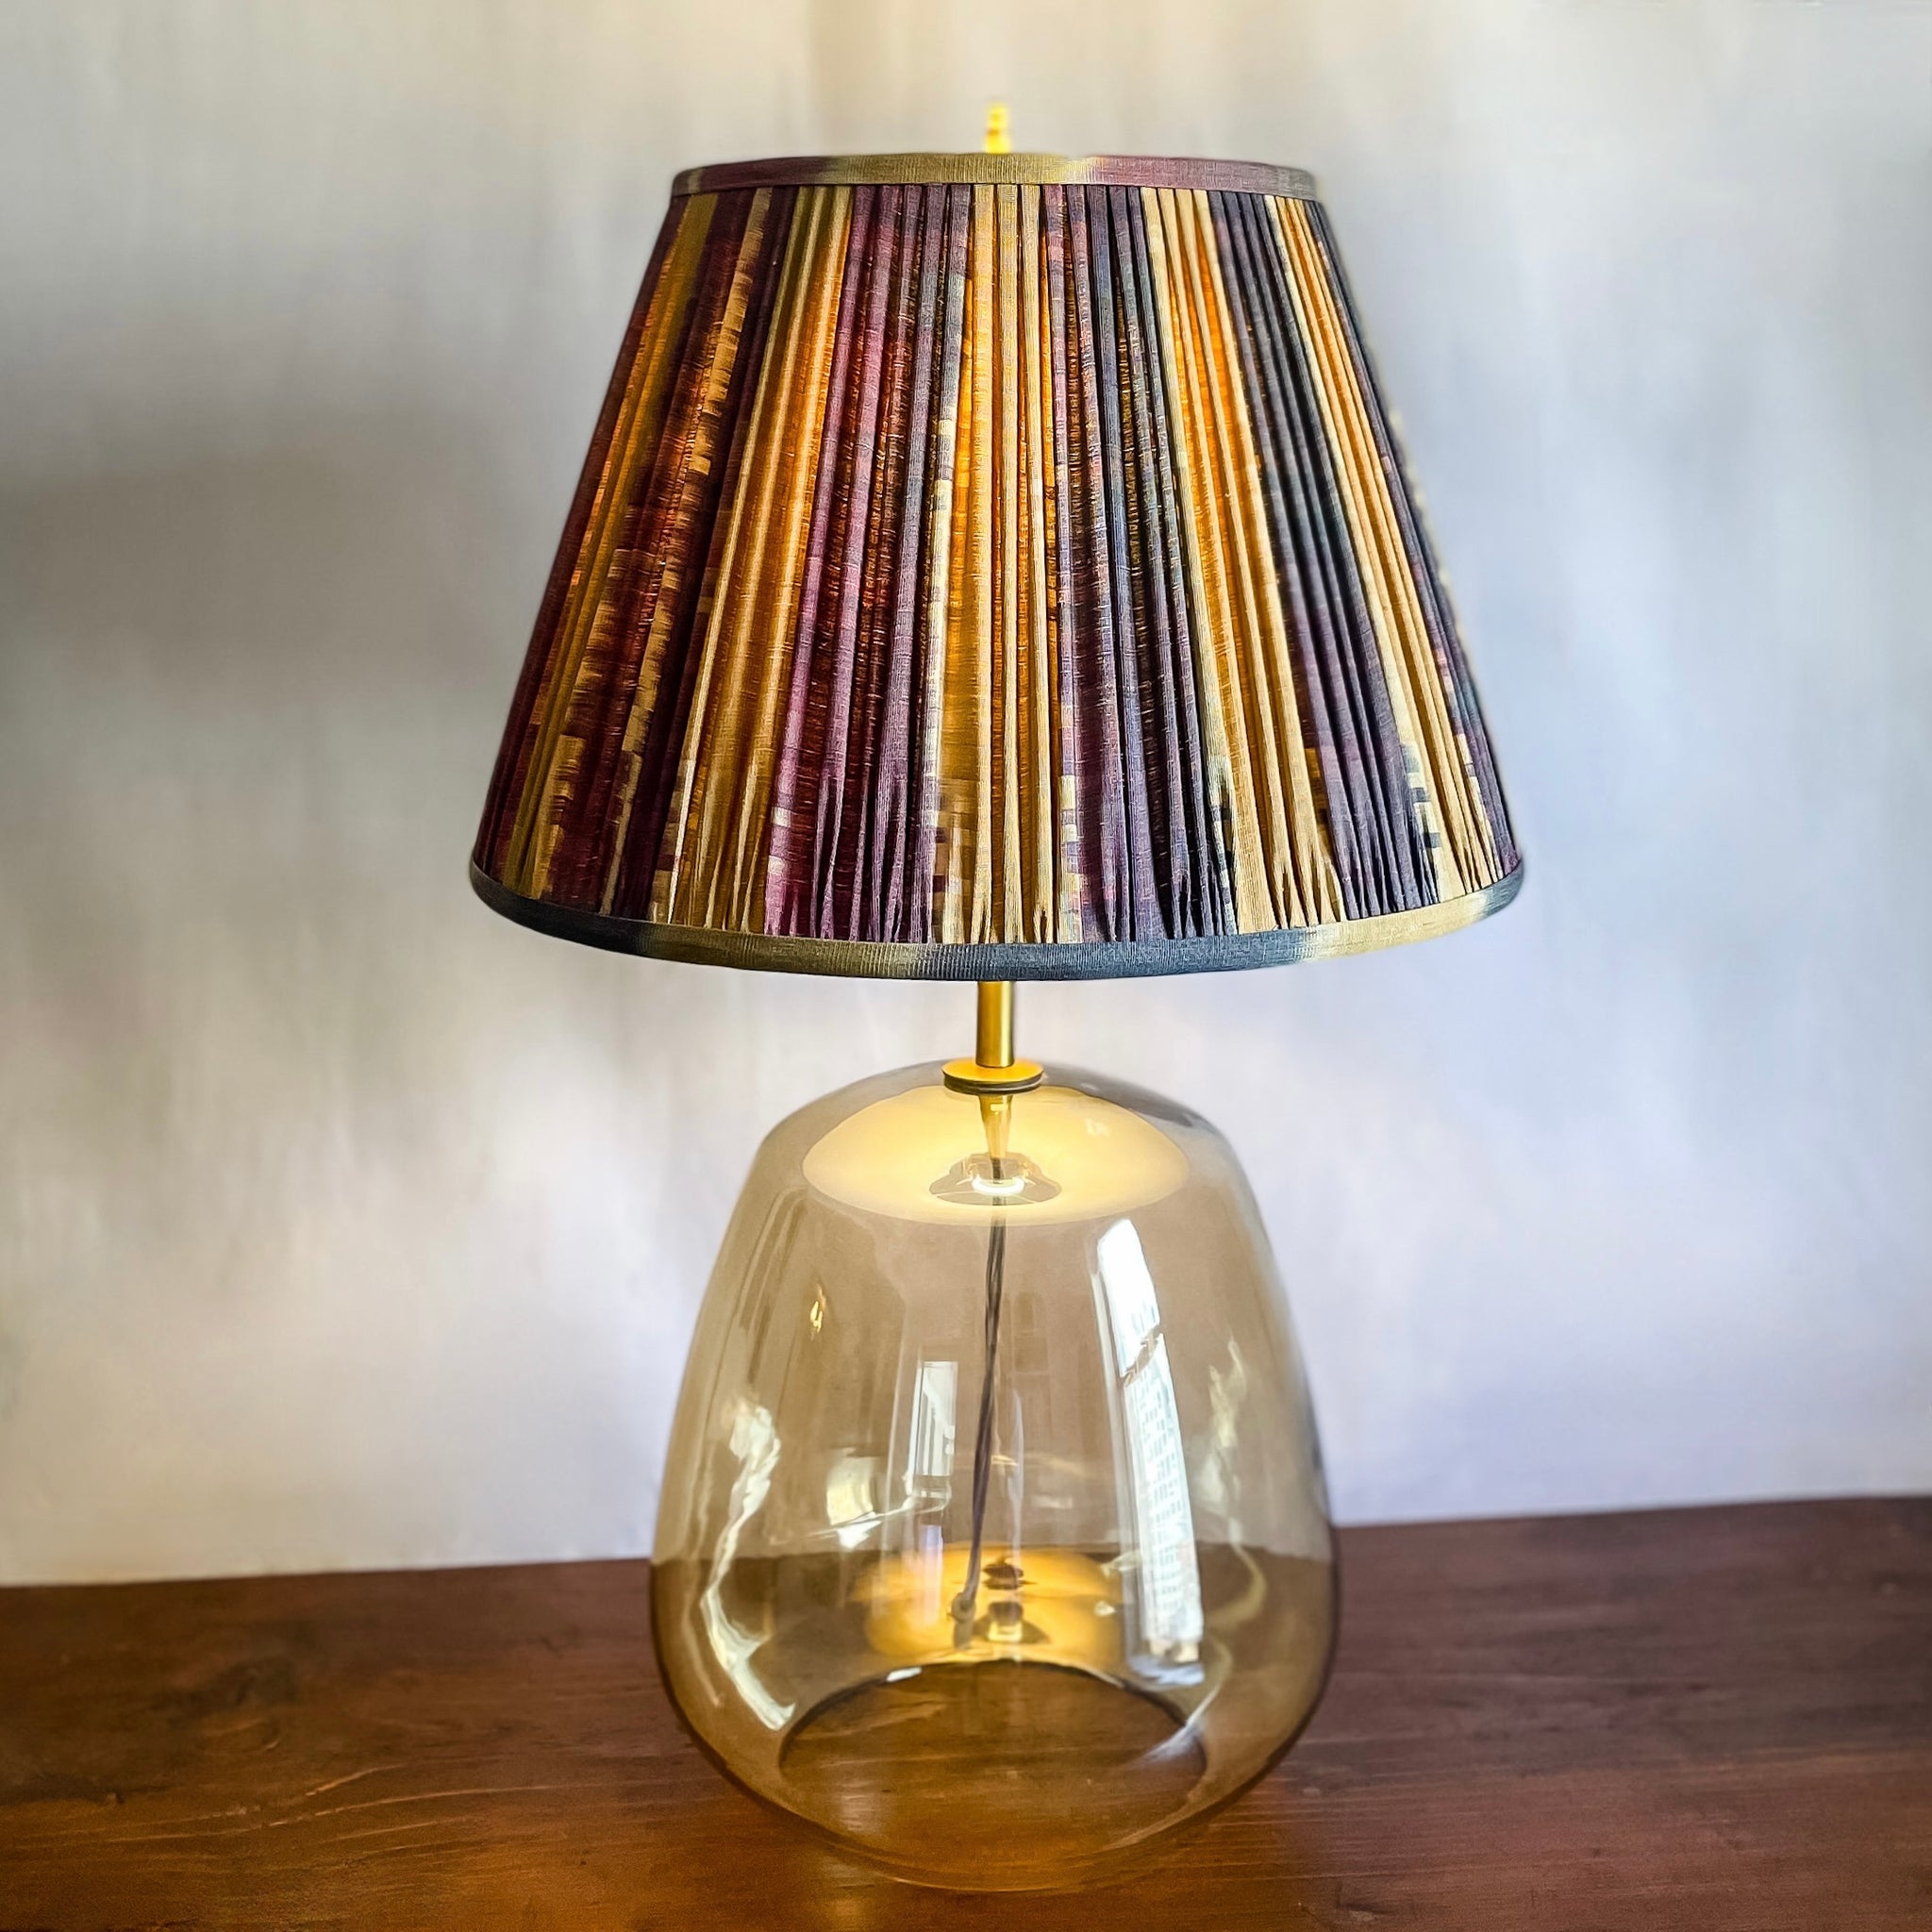 Firat Aubergine Hand Shirred Ikat Lampshade with light on.